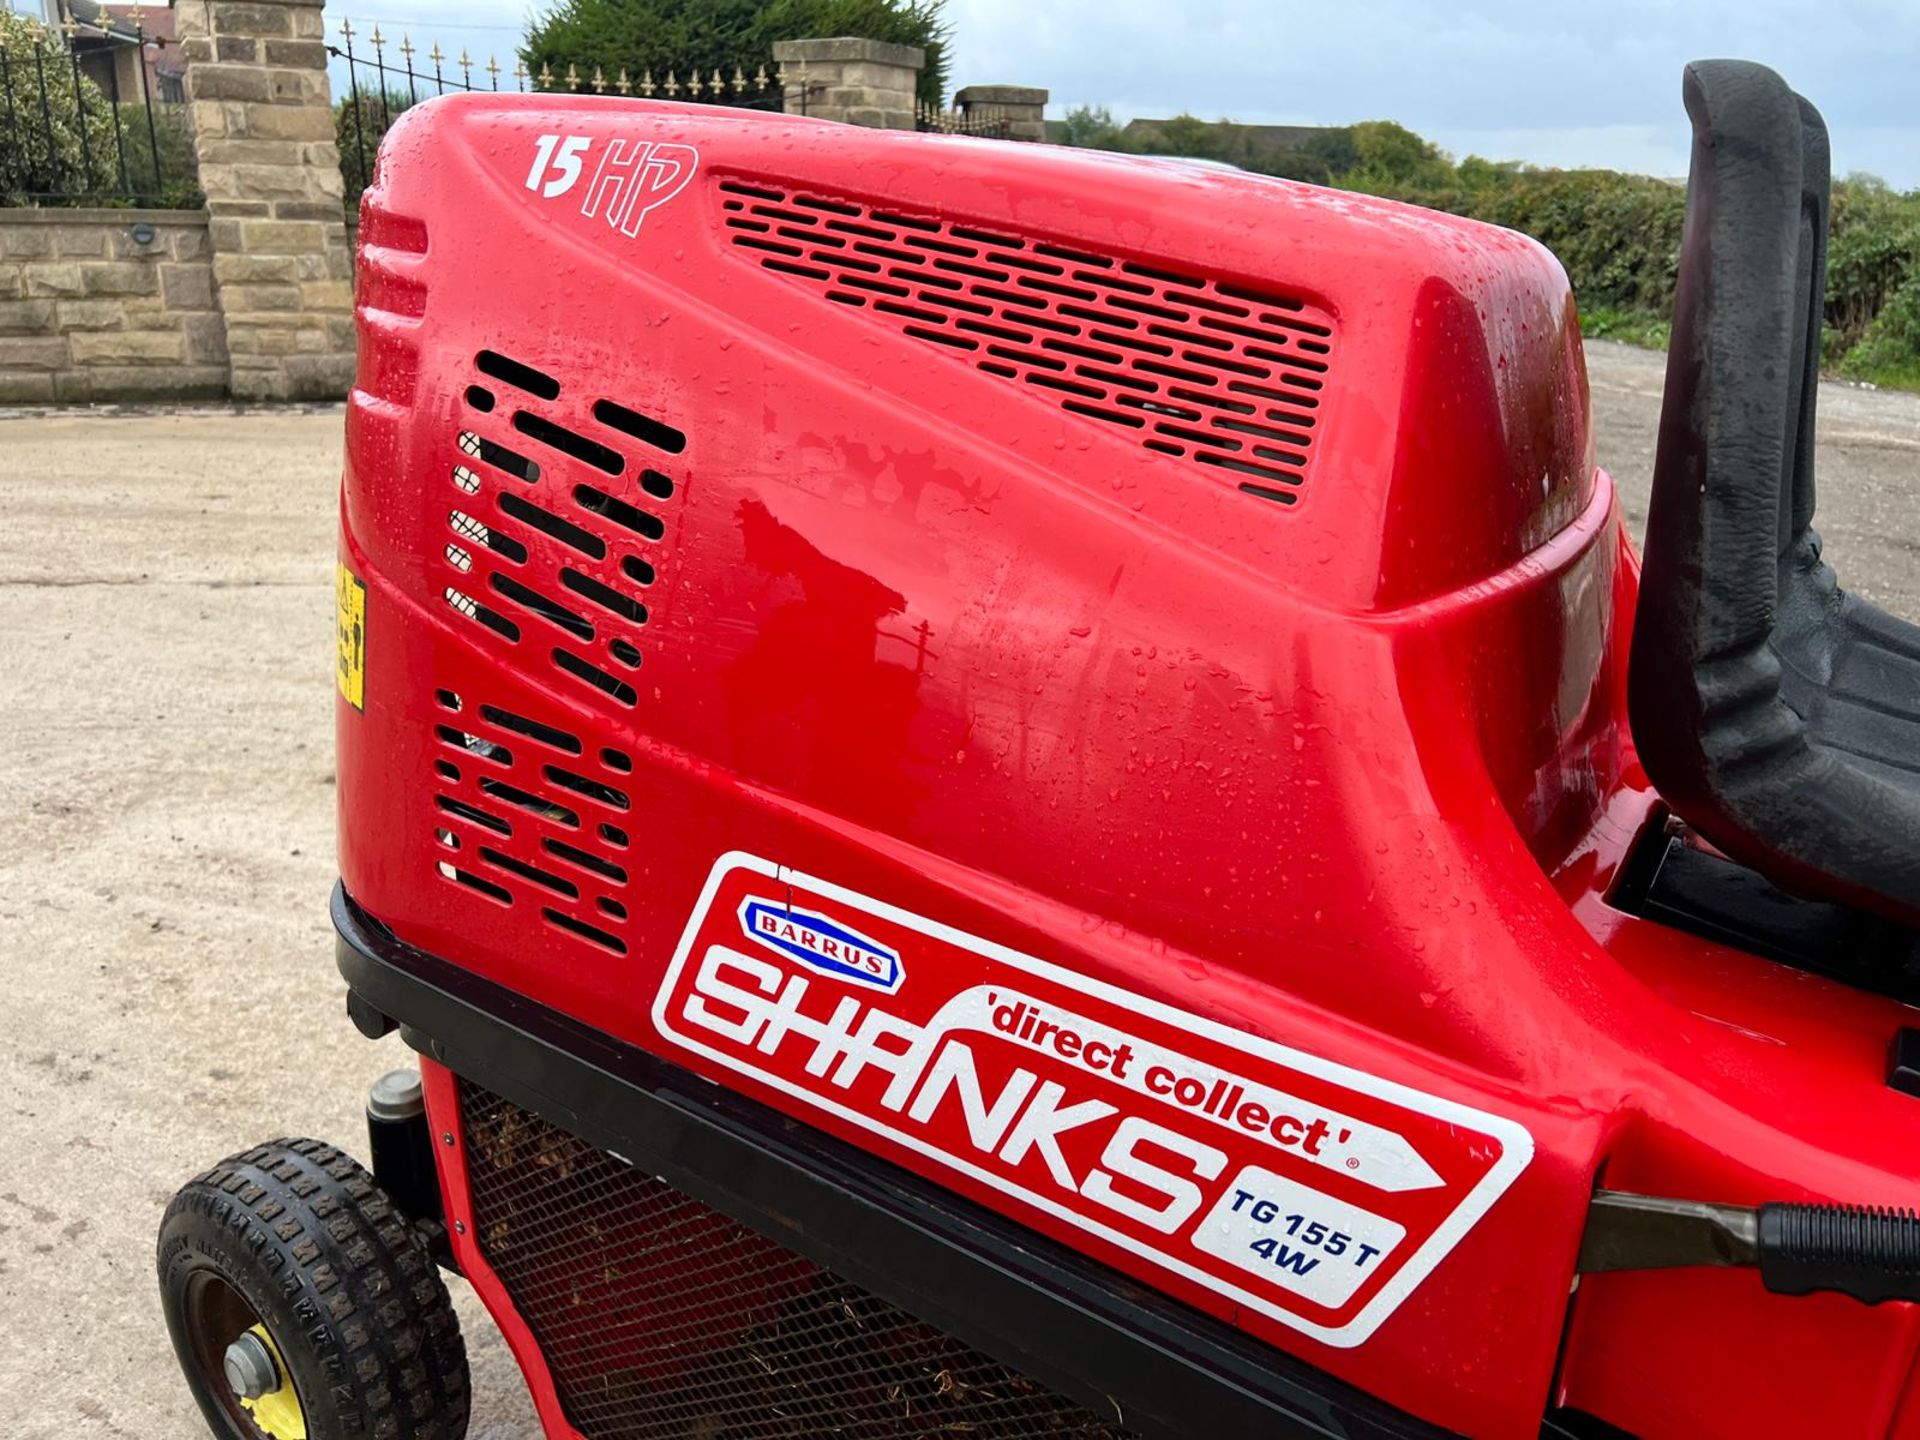 Barrus Shanks TG155T 4W Direct Collect Outfront Ride On Mower *PLUS VAT* - Image 14 of 17